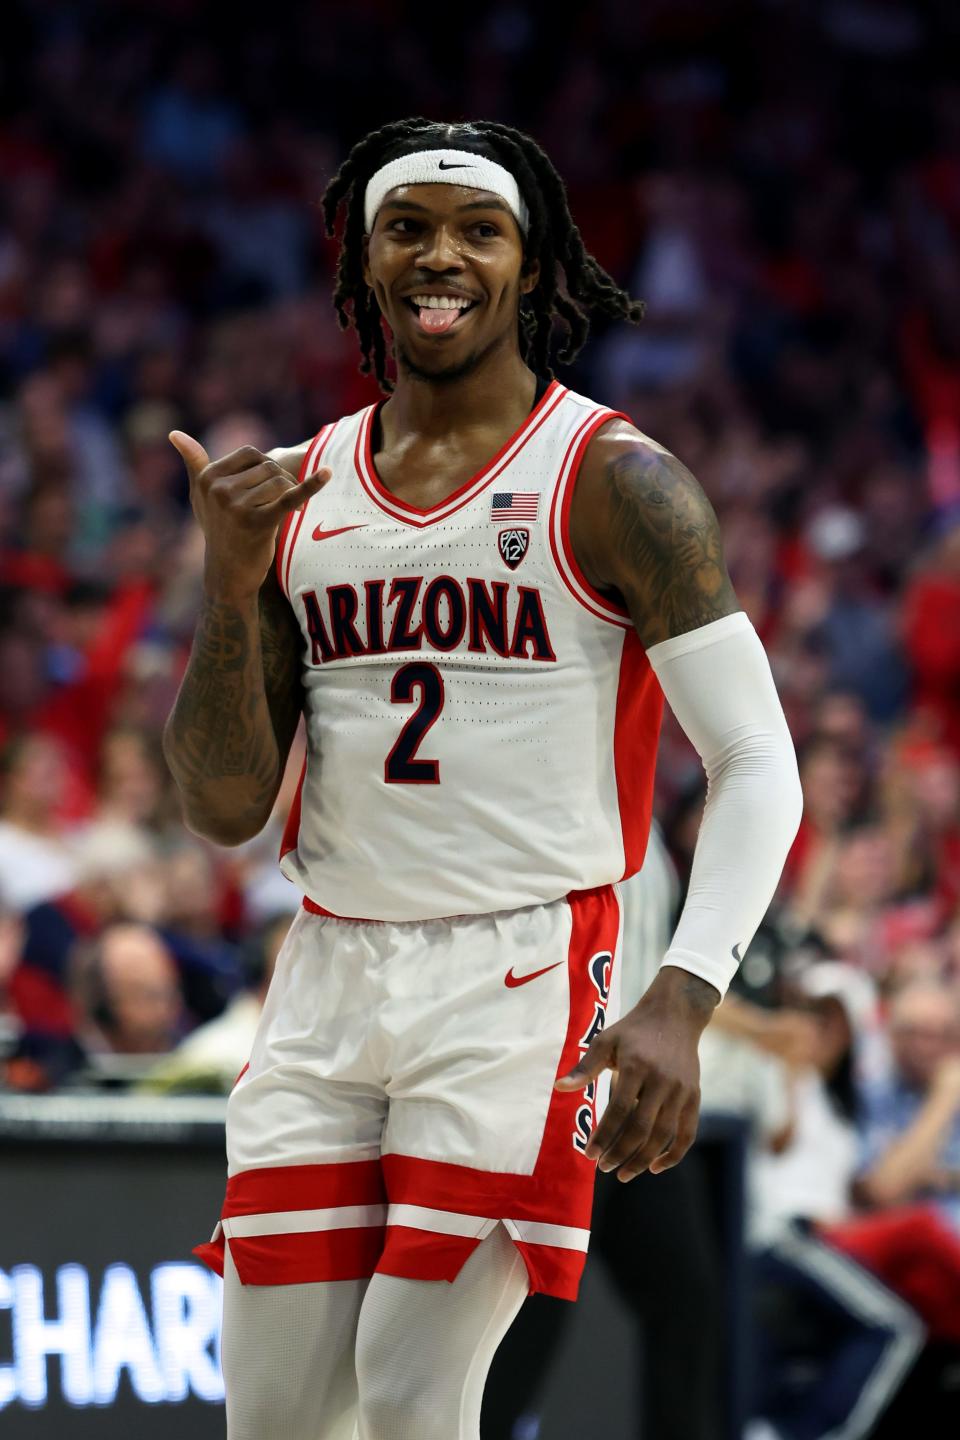 Arizona Wildcats guard Caleb Love (2) celebrates after a basket against the Washington Huskies during the first half at McKale Center.